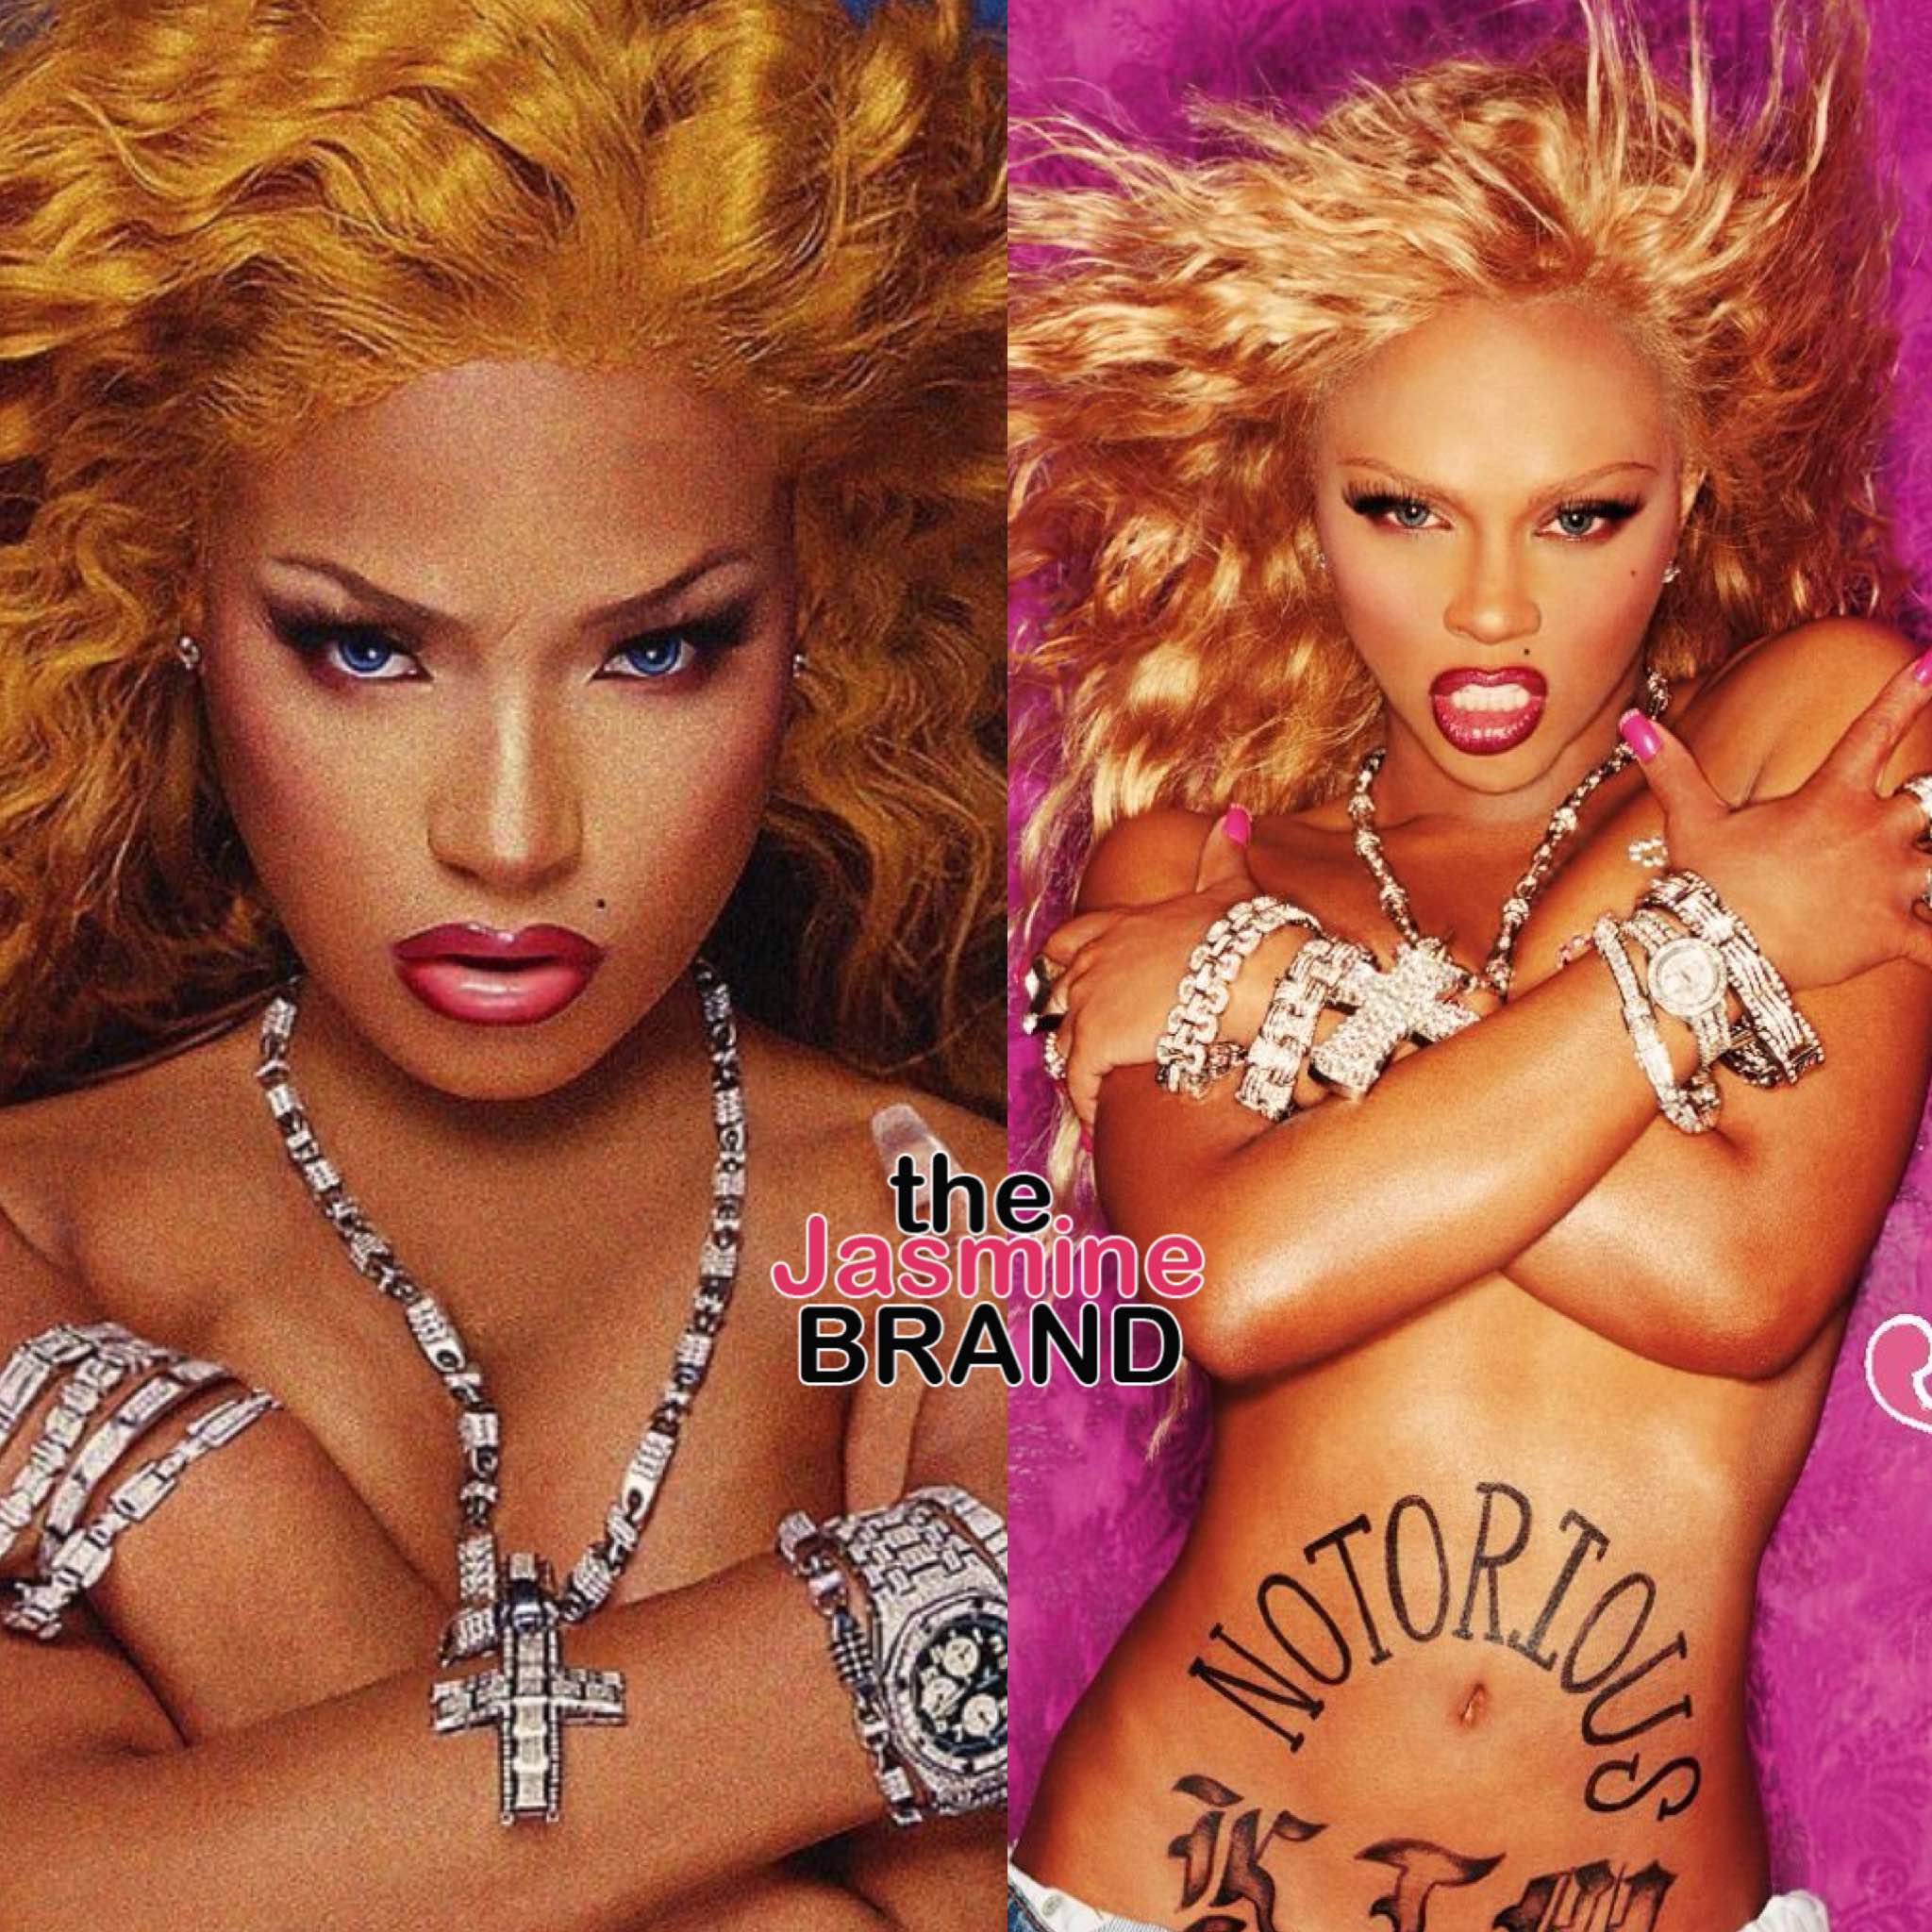 Stefflon Don Pays Homage To Lil Kim, But Is Pissed Cover Leaked: \